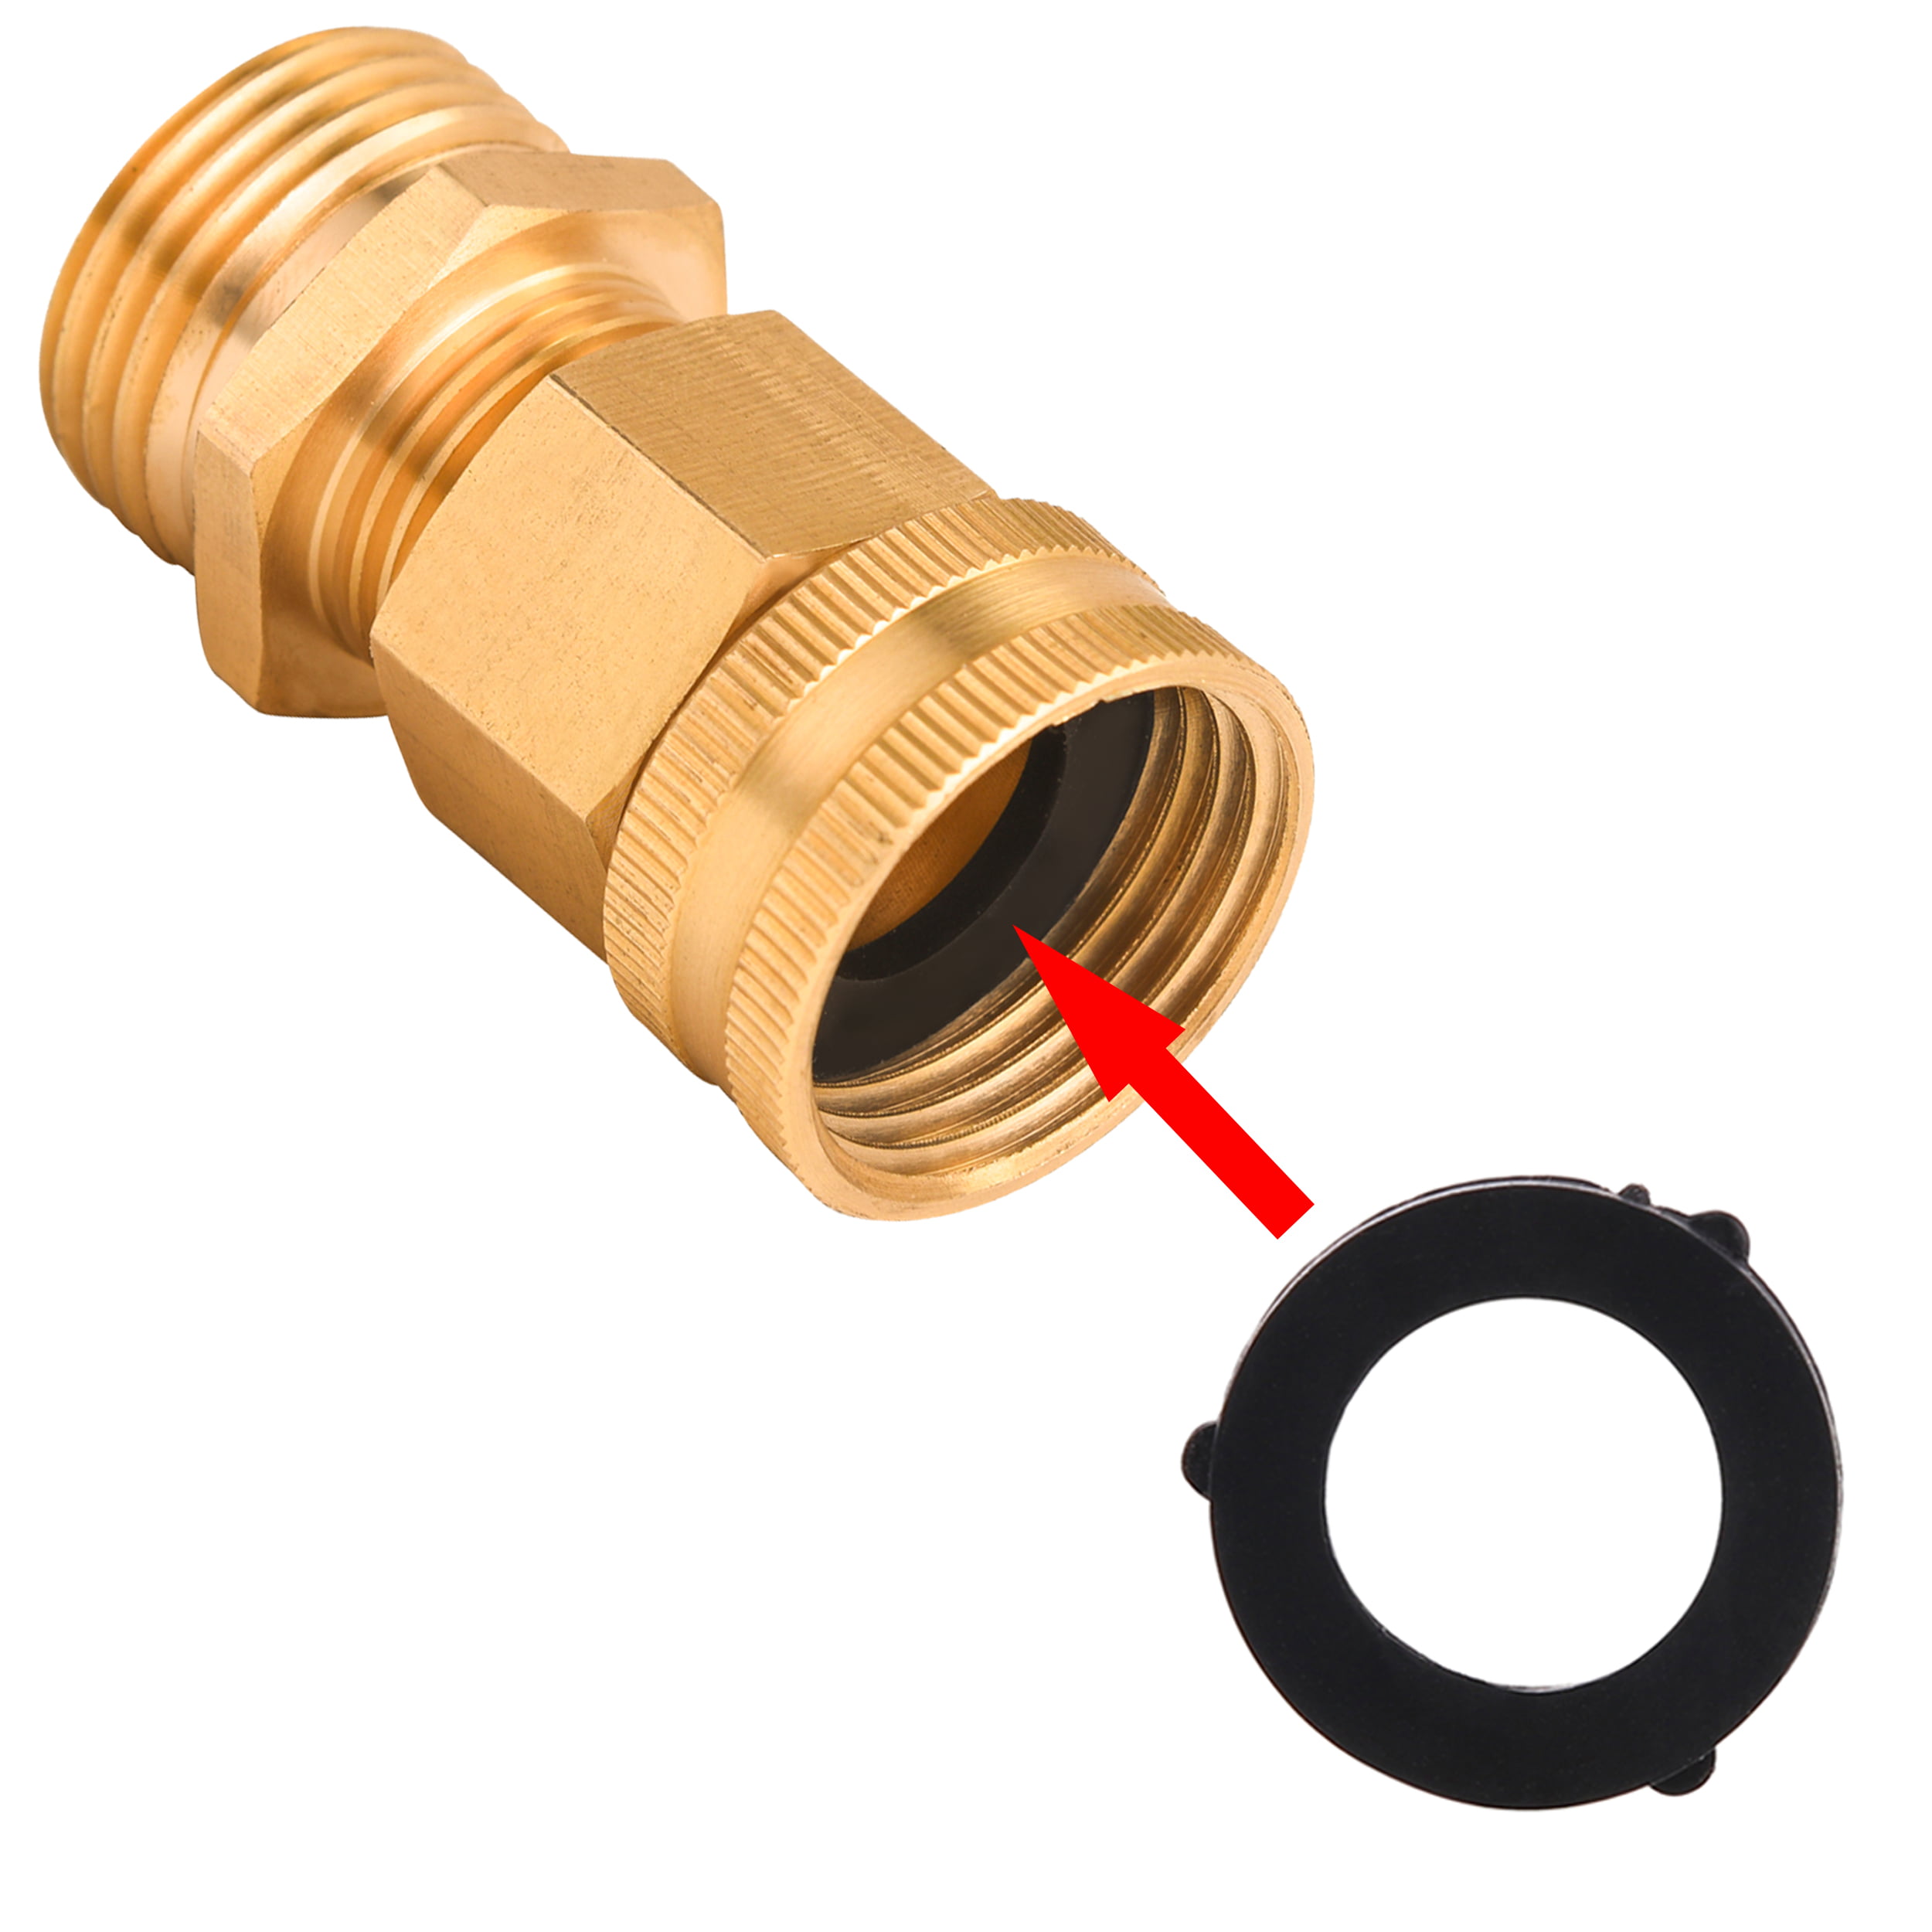 Male to Male M MINGLE Garden Hose Adapter 3/4 Inch Brass 4 Female to Female 